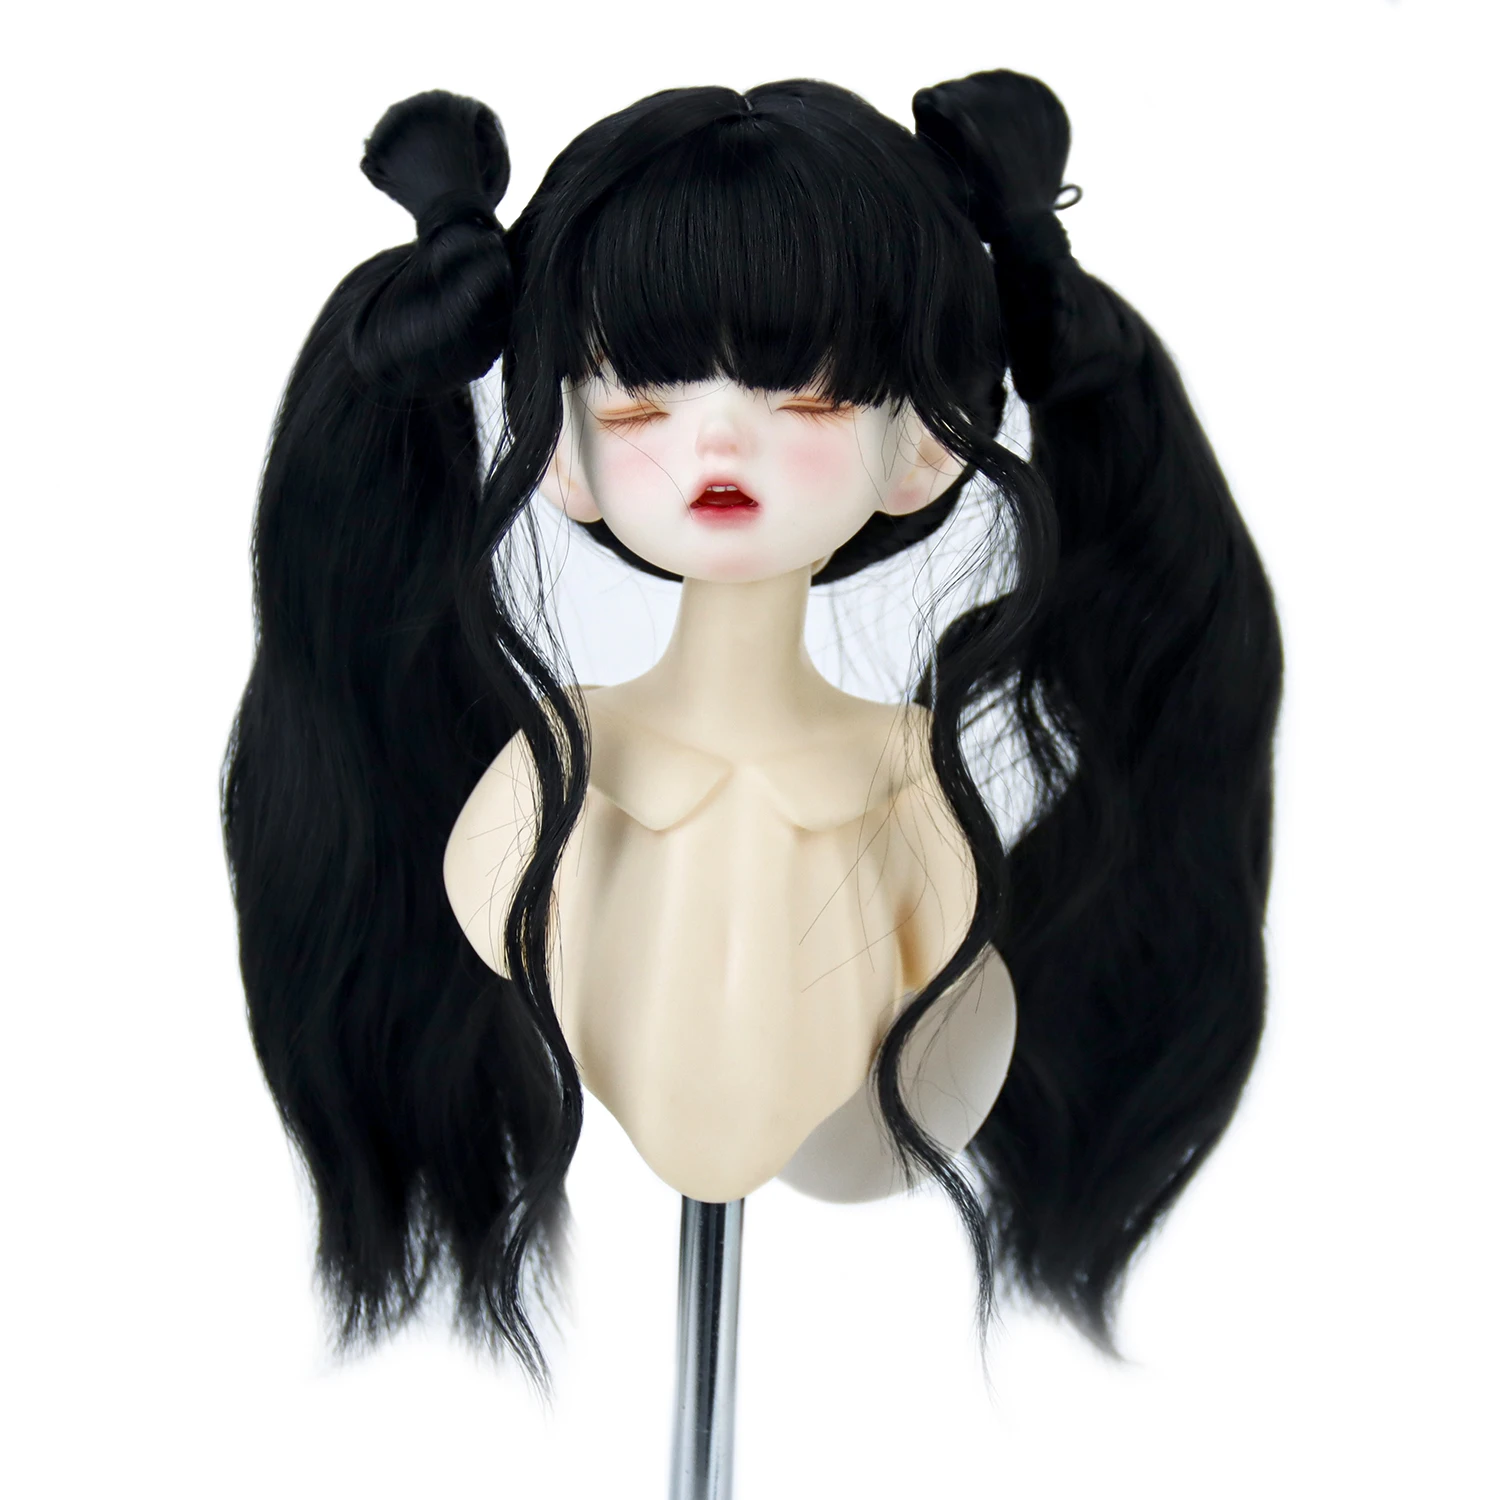 1/6 BJD Wigs Pigtails Black Braid With Bangs Wavy 6-7'' MSD Doll Accessories Heat Resistant Fiber Tress Doll Hair DIY Gifts 1pcs 26colors russian doll accessories diy wig hair bjd curly doll hair tress for dolls